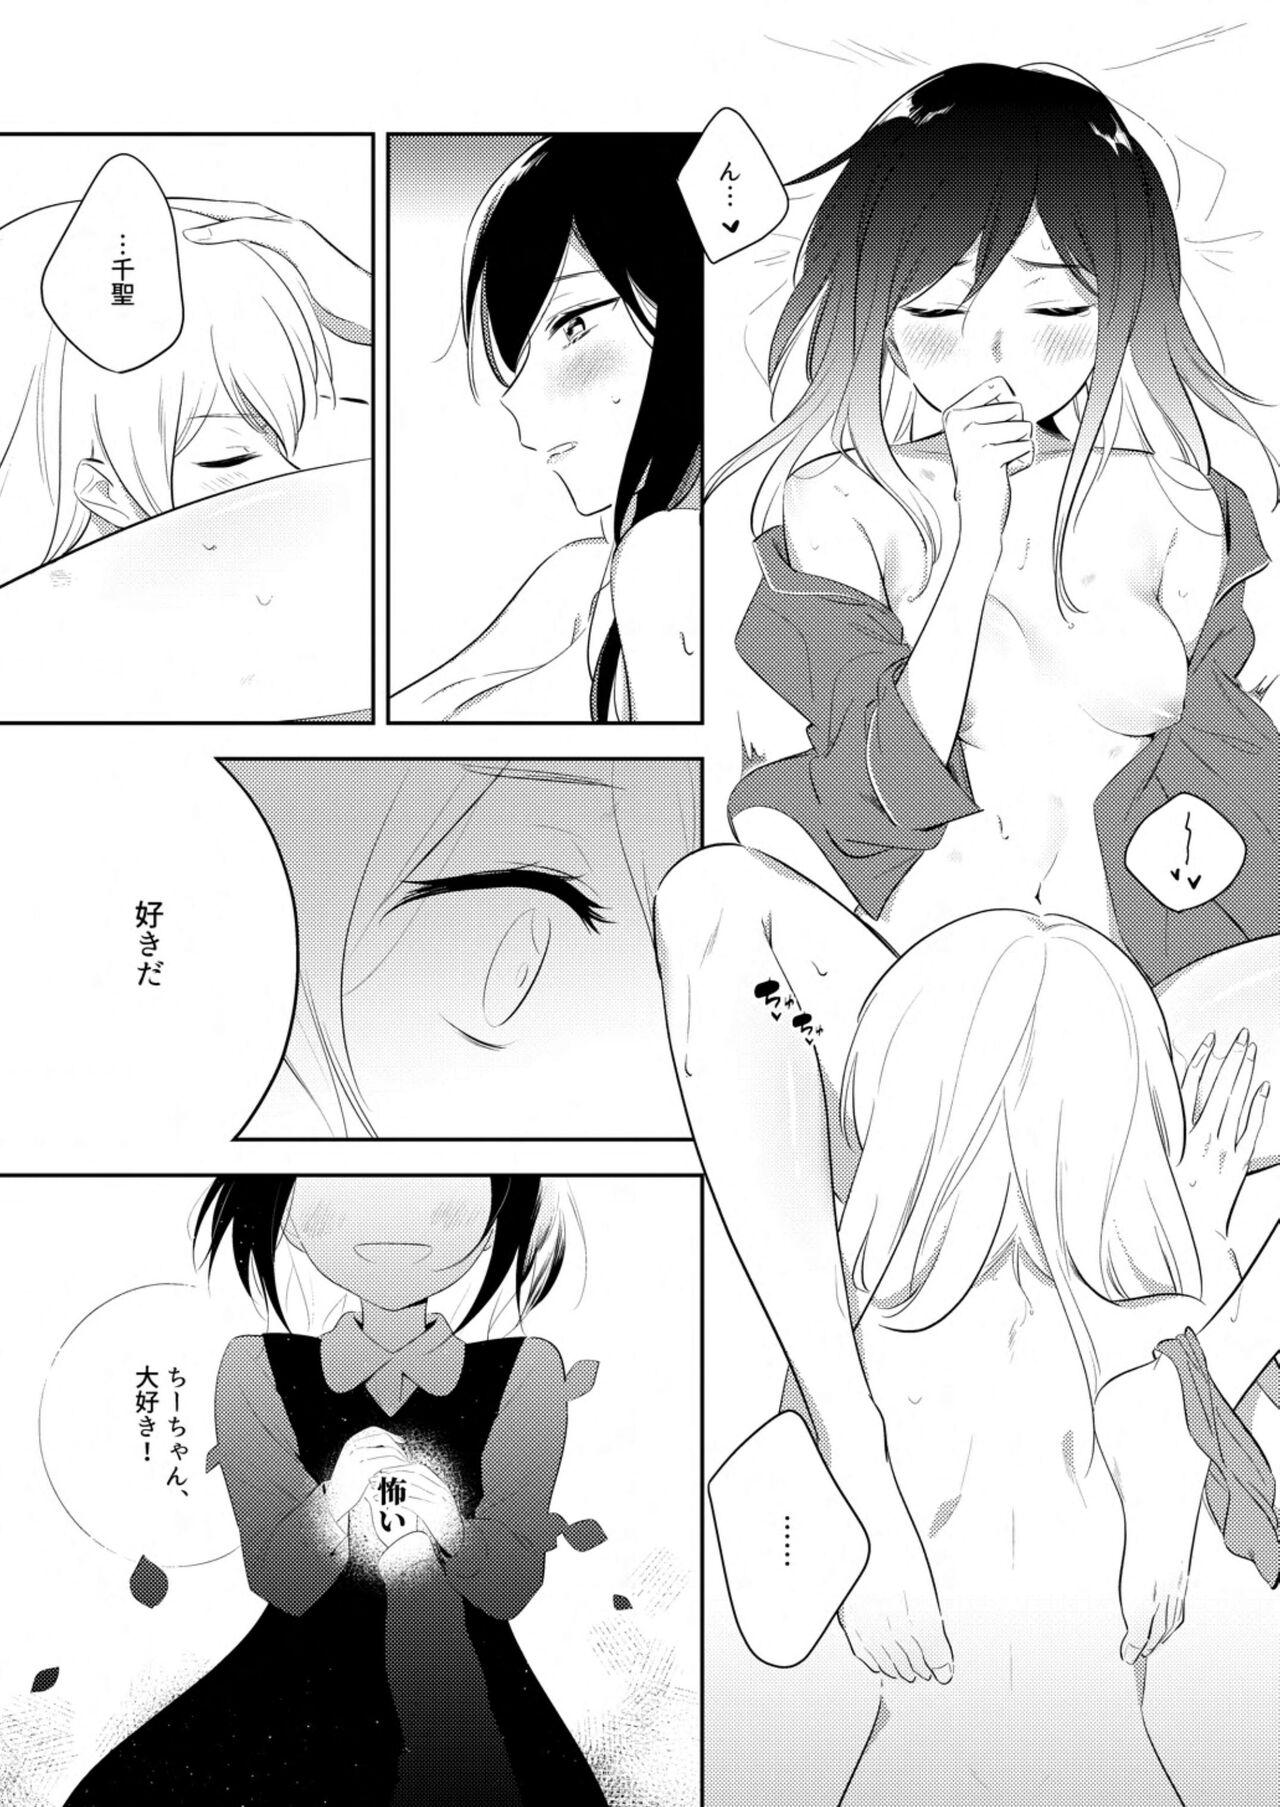 Bald Pussy 《By Their Own Beauties》 - Bang dream Hot Pussy - Page 9